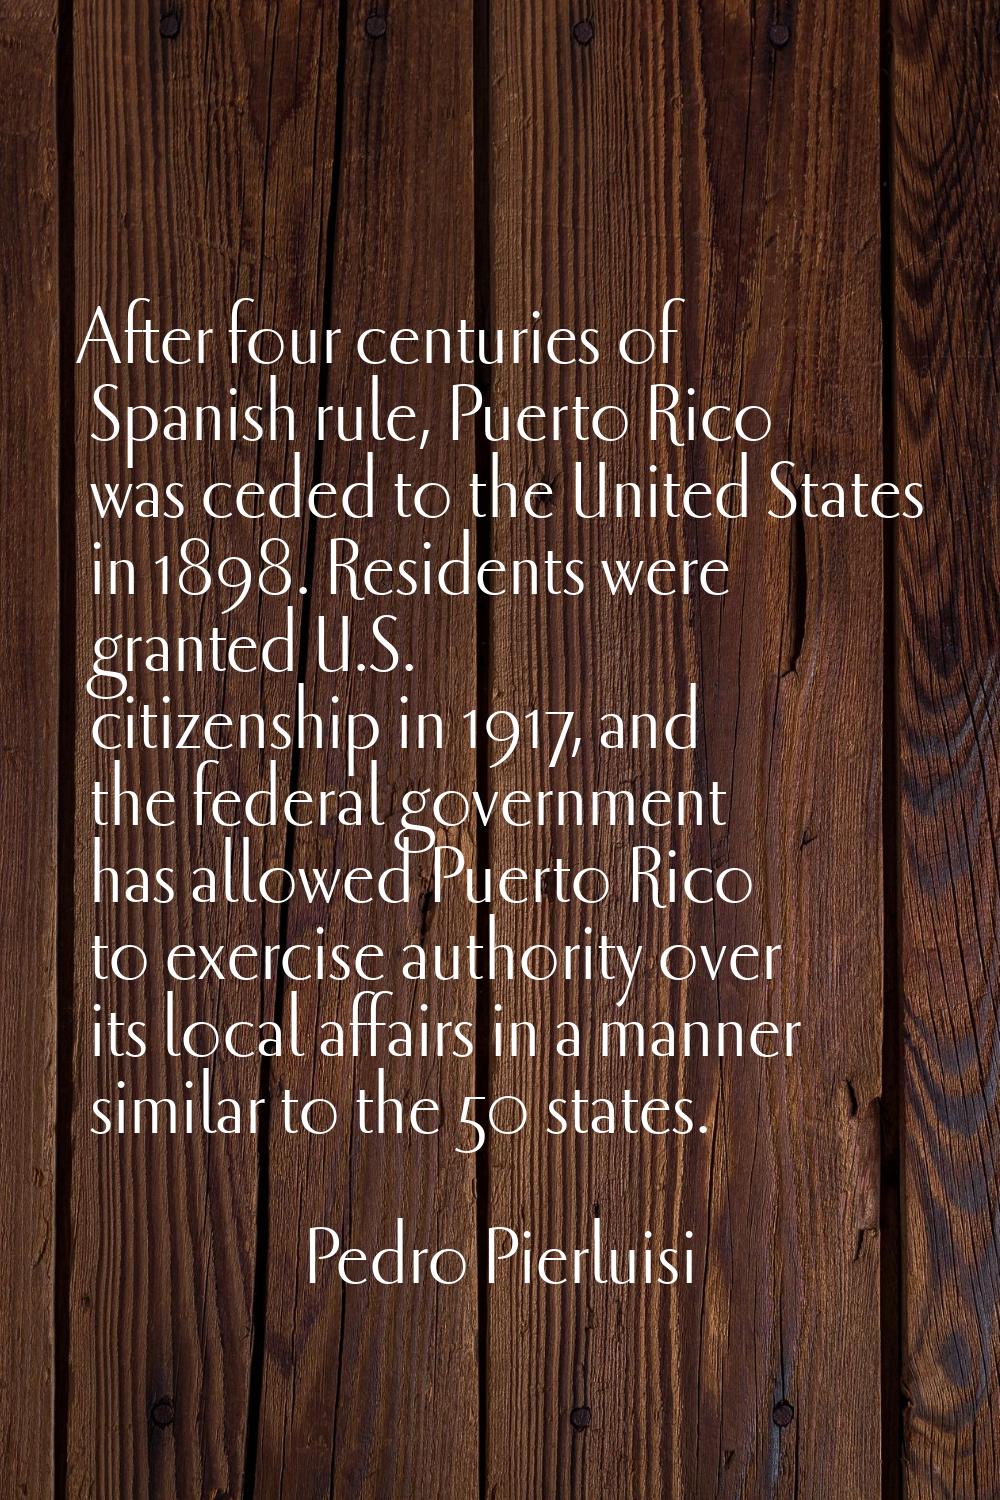 After four centuries of Spanish rule, Puerto Rico was ceded to the United States in 1898. Residents